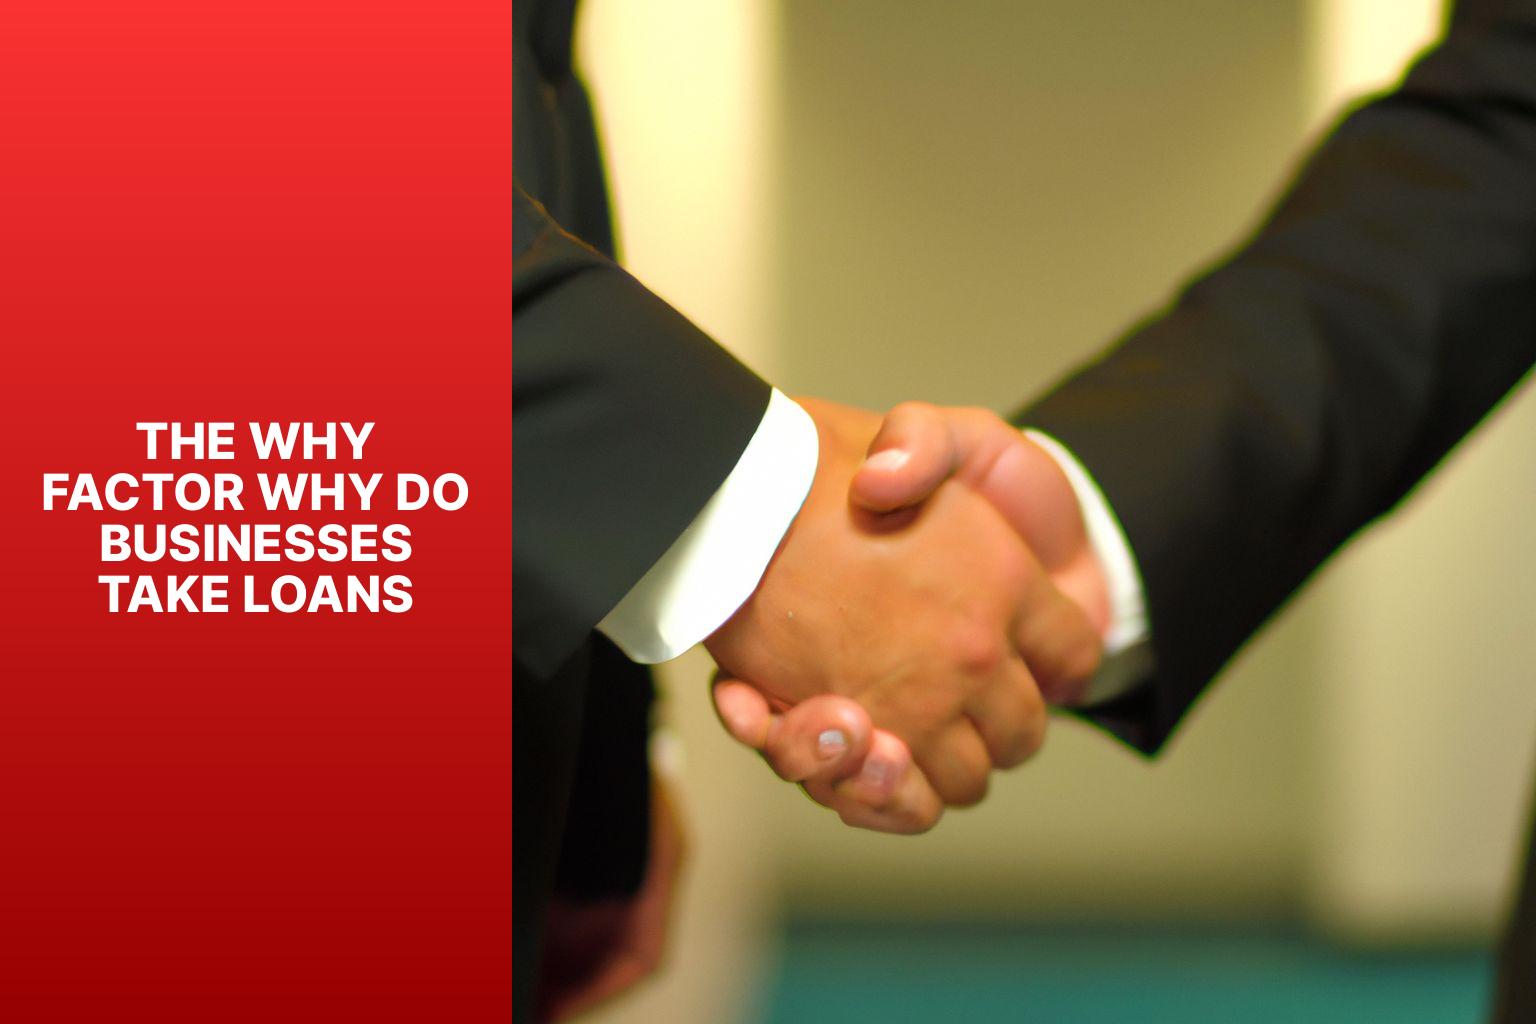 The Why Factor Why Do Businesses Take Loans